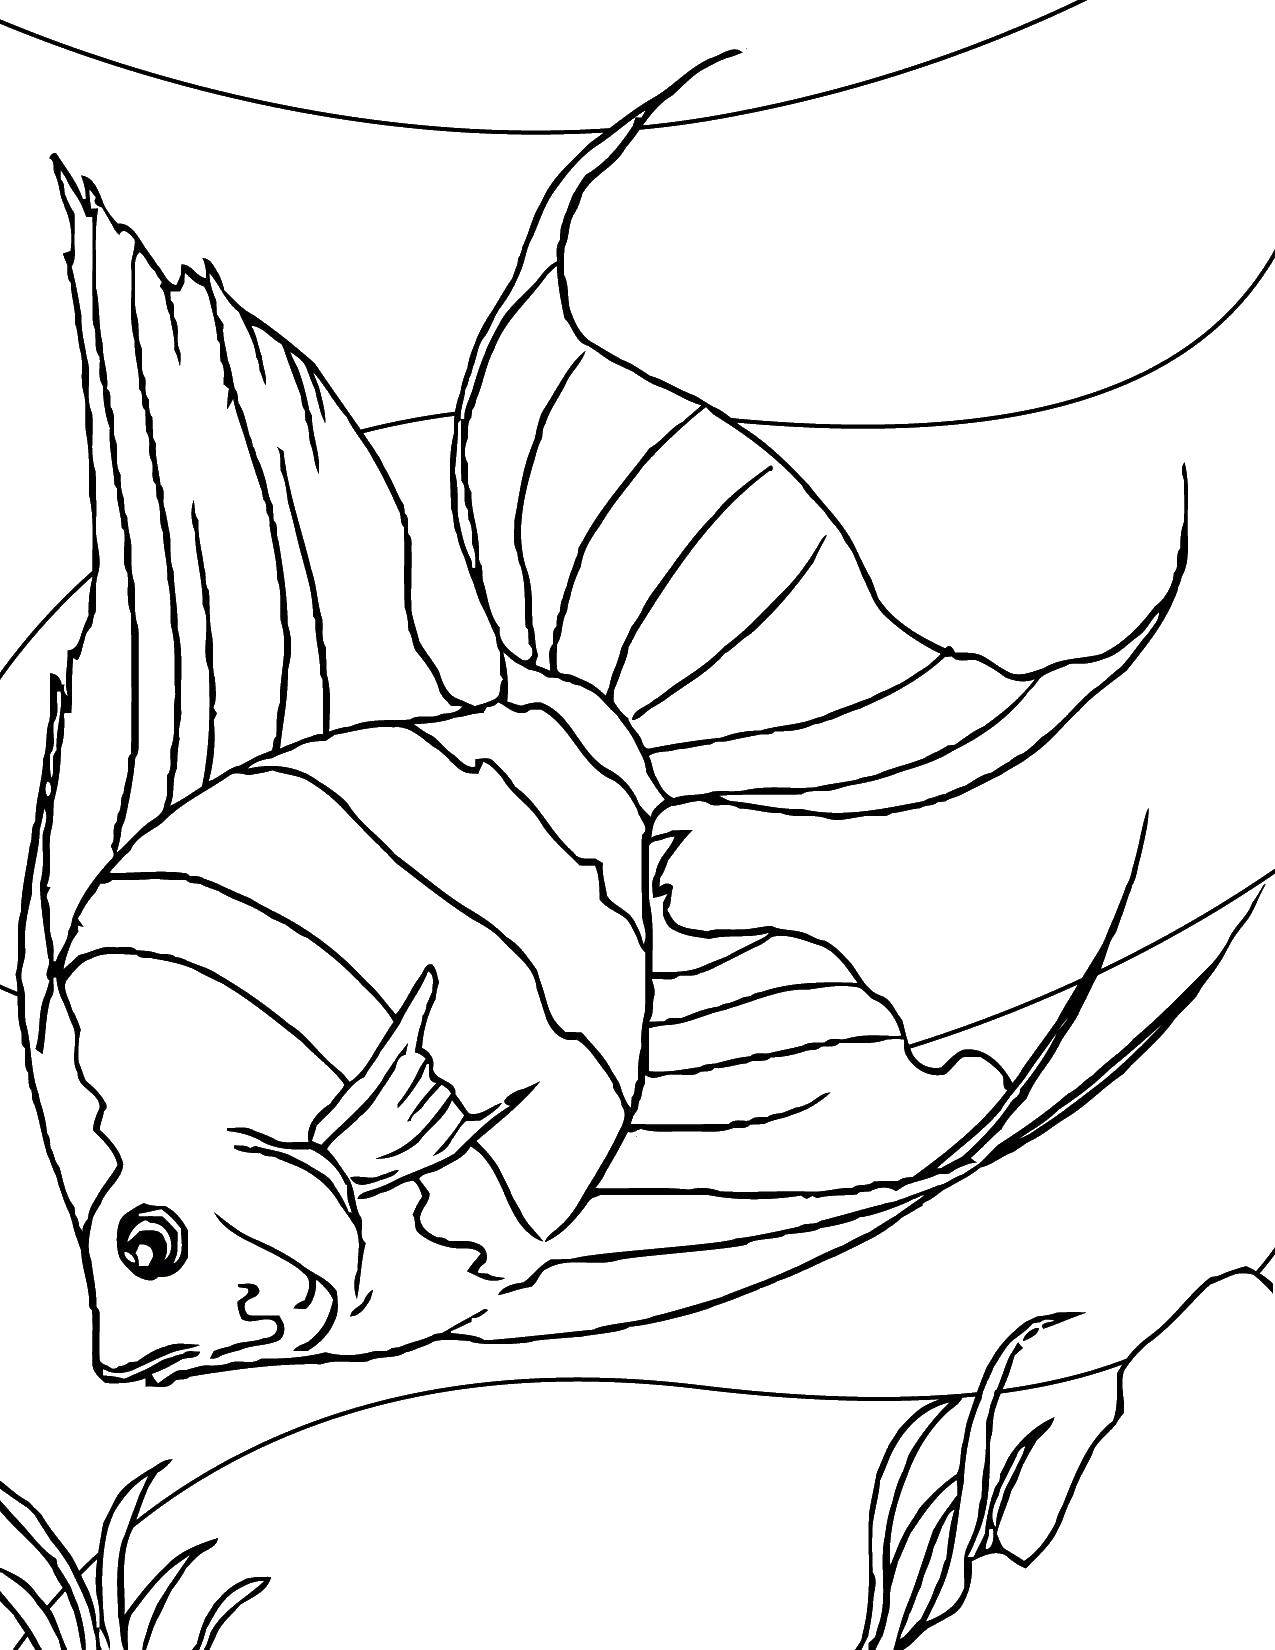 Coloring Deep-sea fish. Category fish. Tags:  Underwater world, fish.